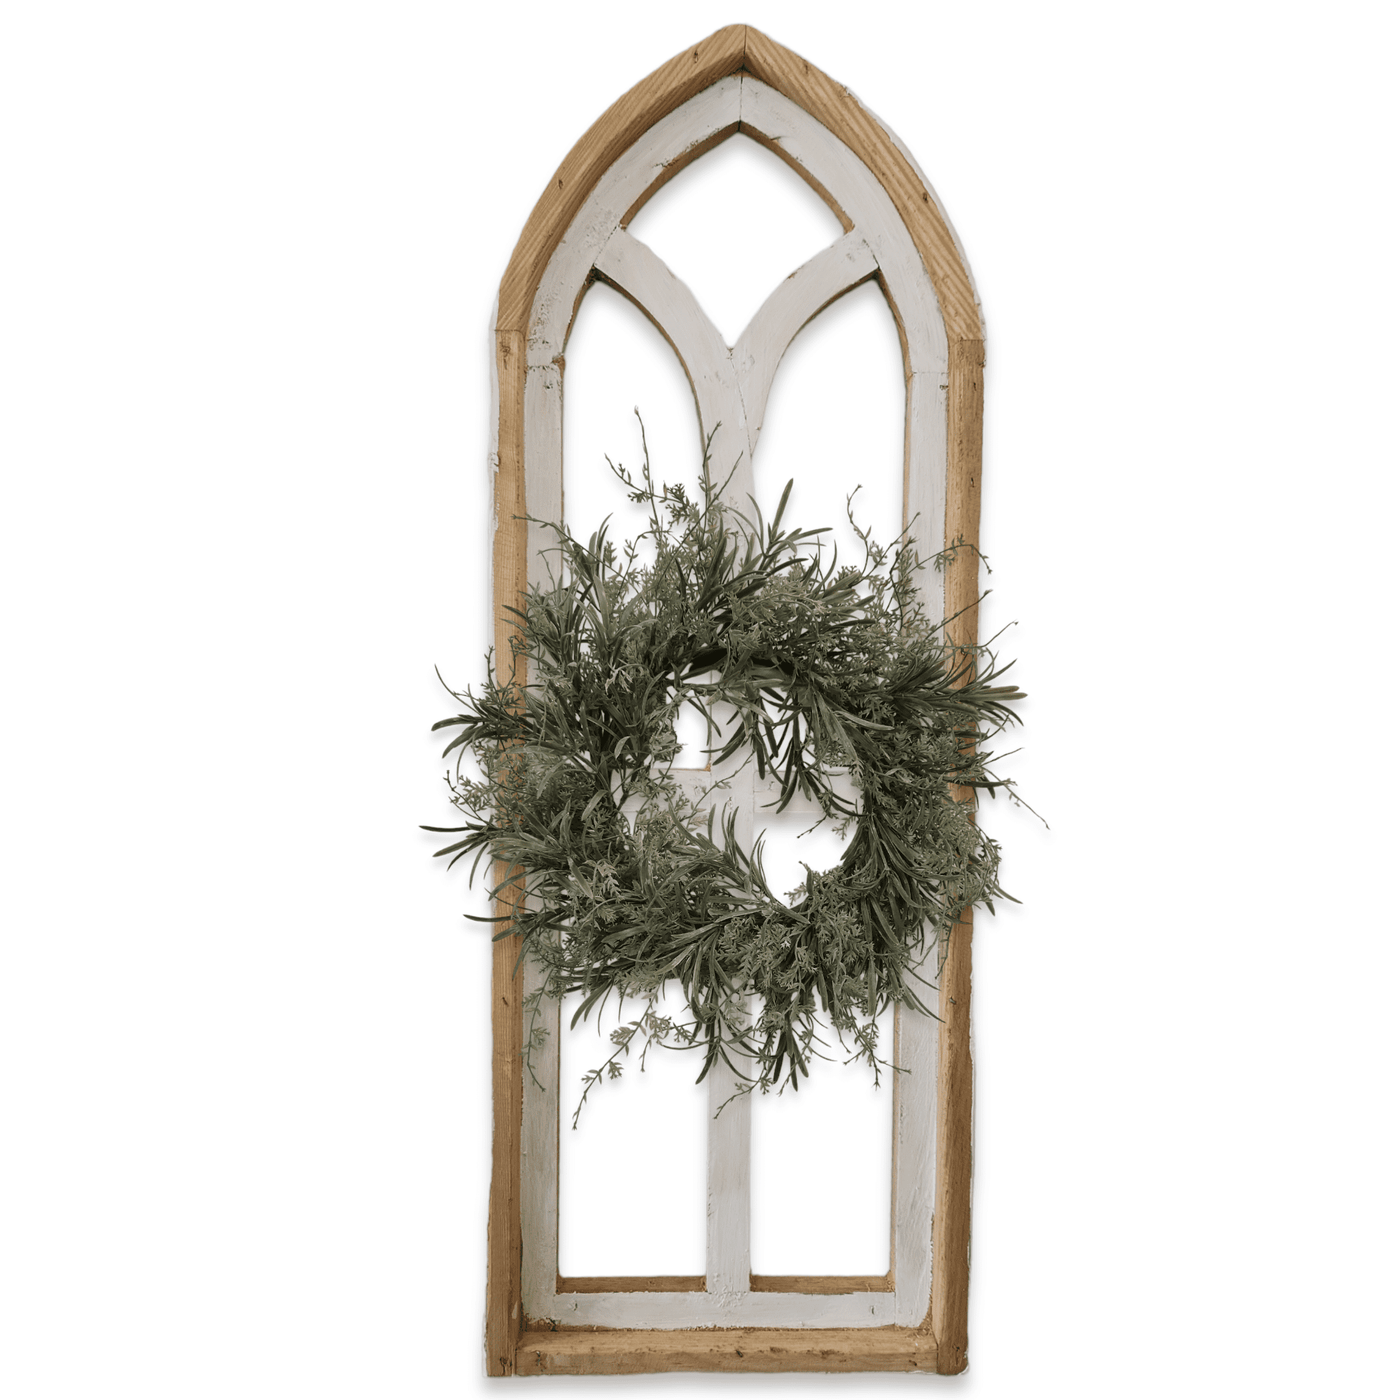 The Ivory Point Farmhouse Wooden Wall Window Arch Single -3 Sizes The Ivory Point Cathedral - Ranch Junkie Mercantile LLC